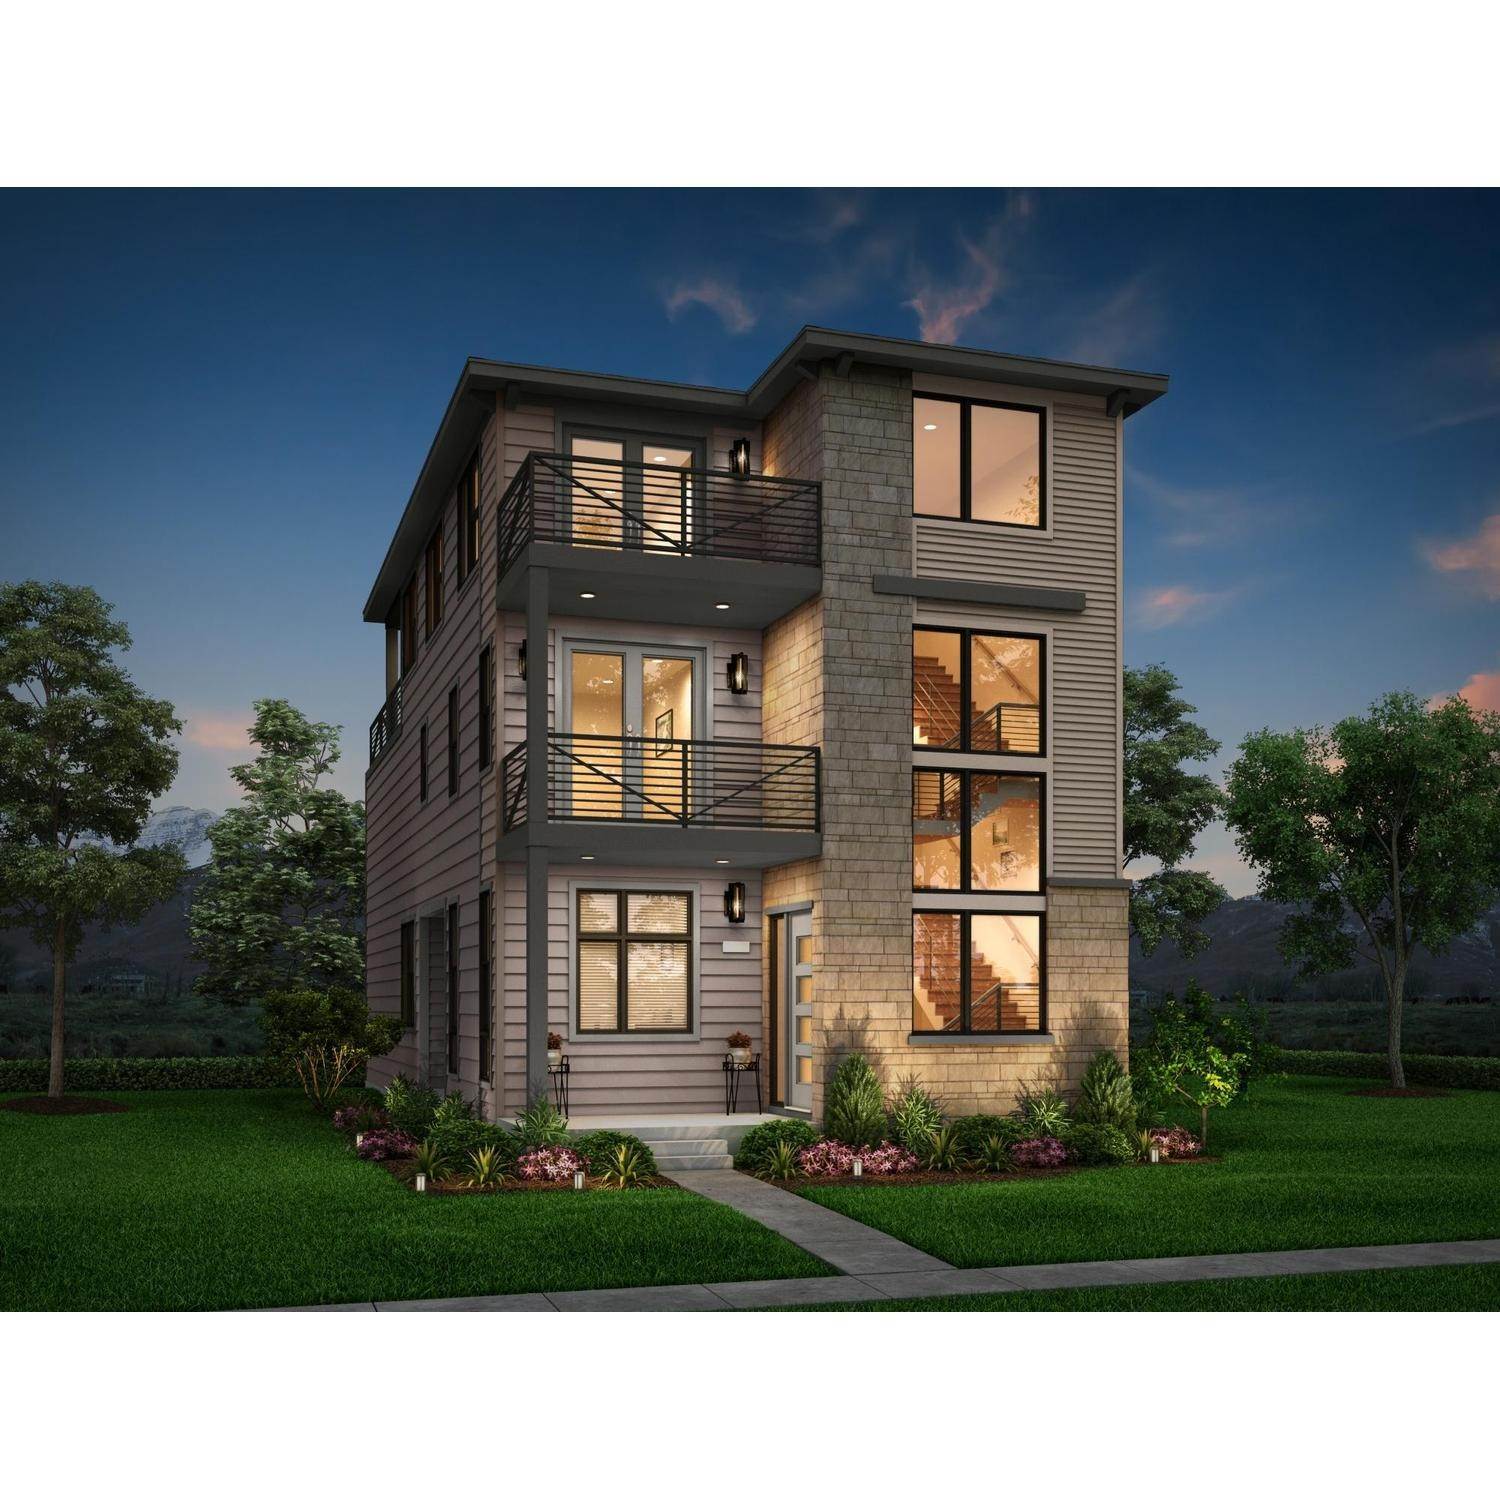 Single Family for Sale at Aurora, CO 80019